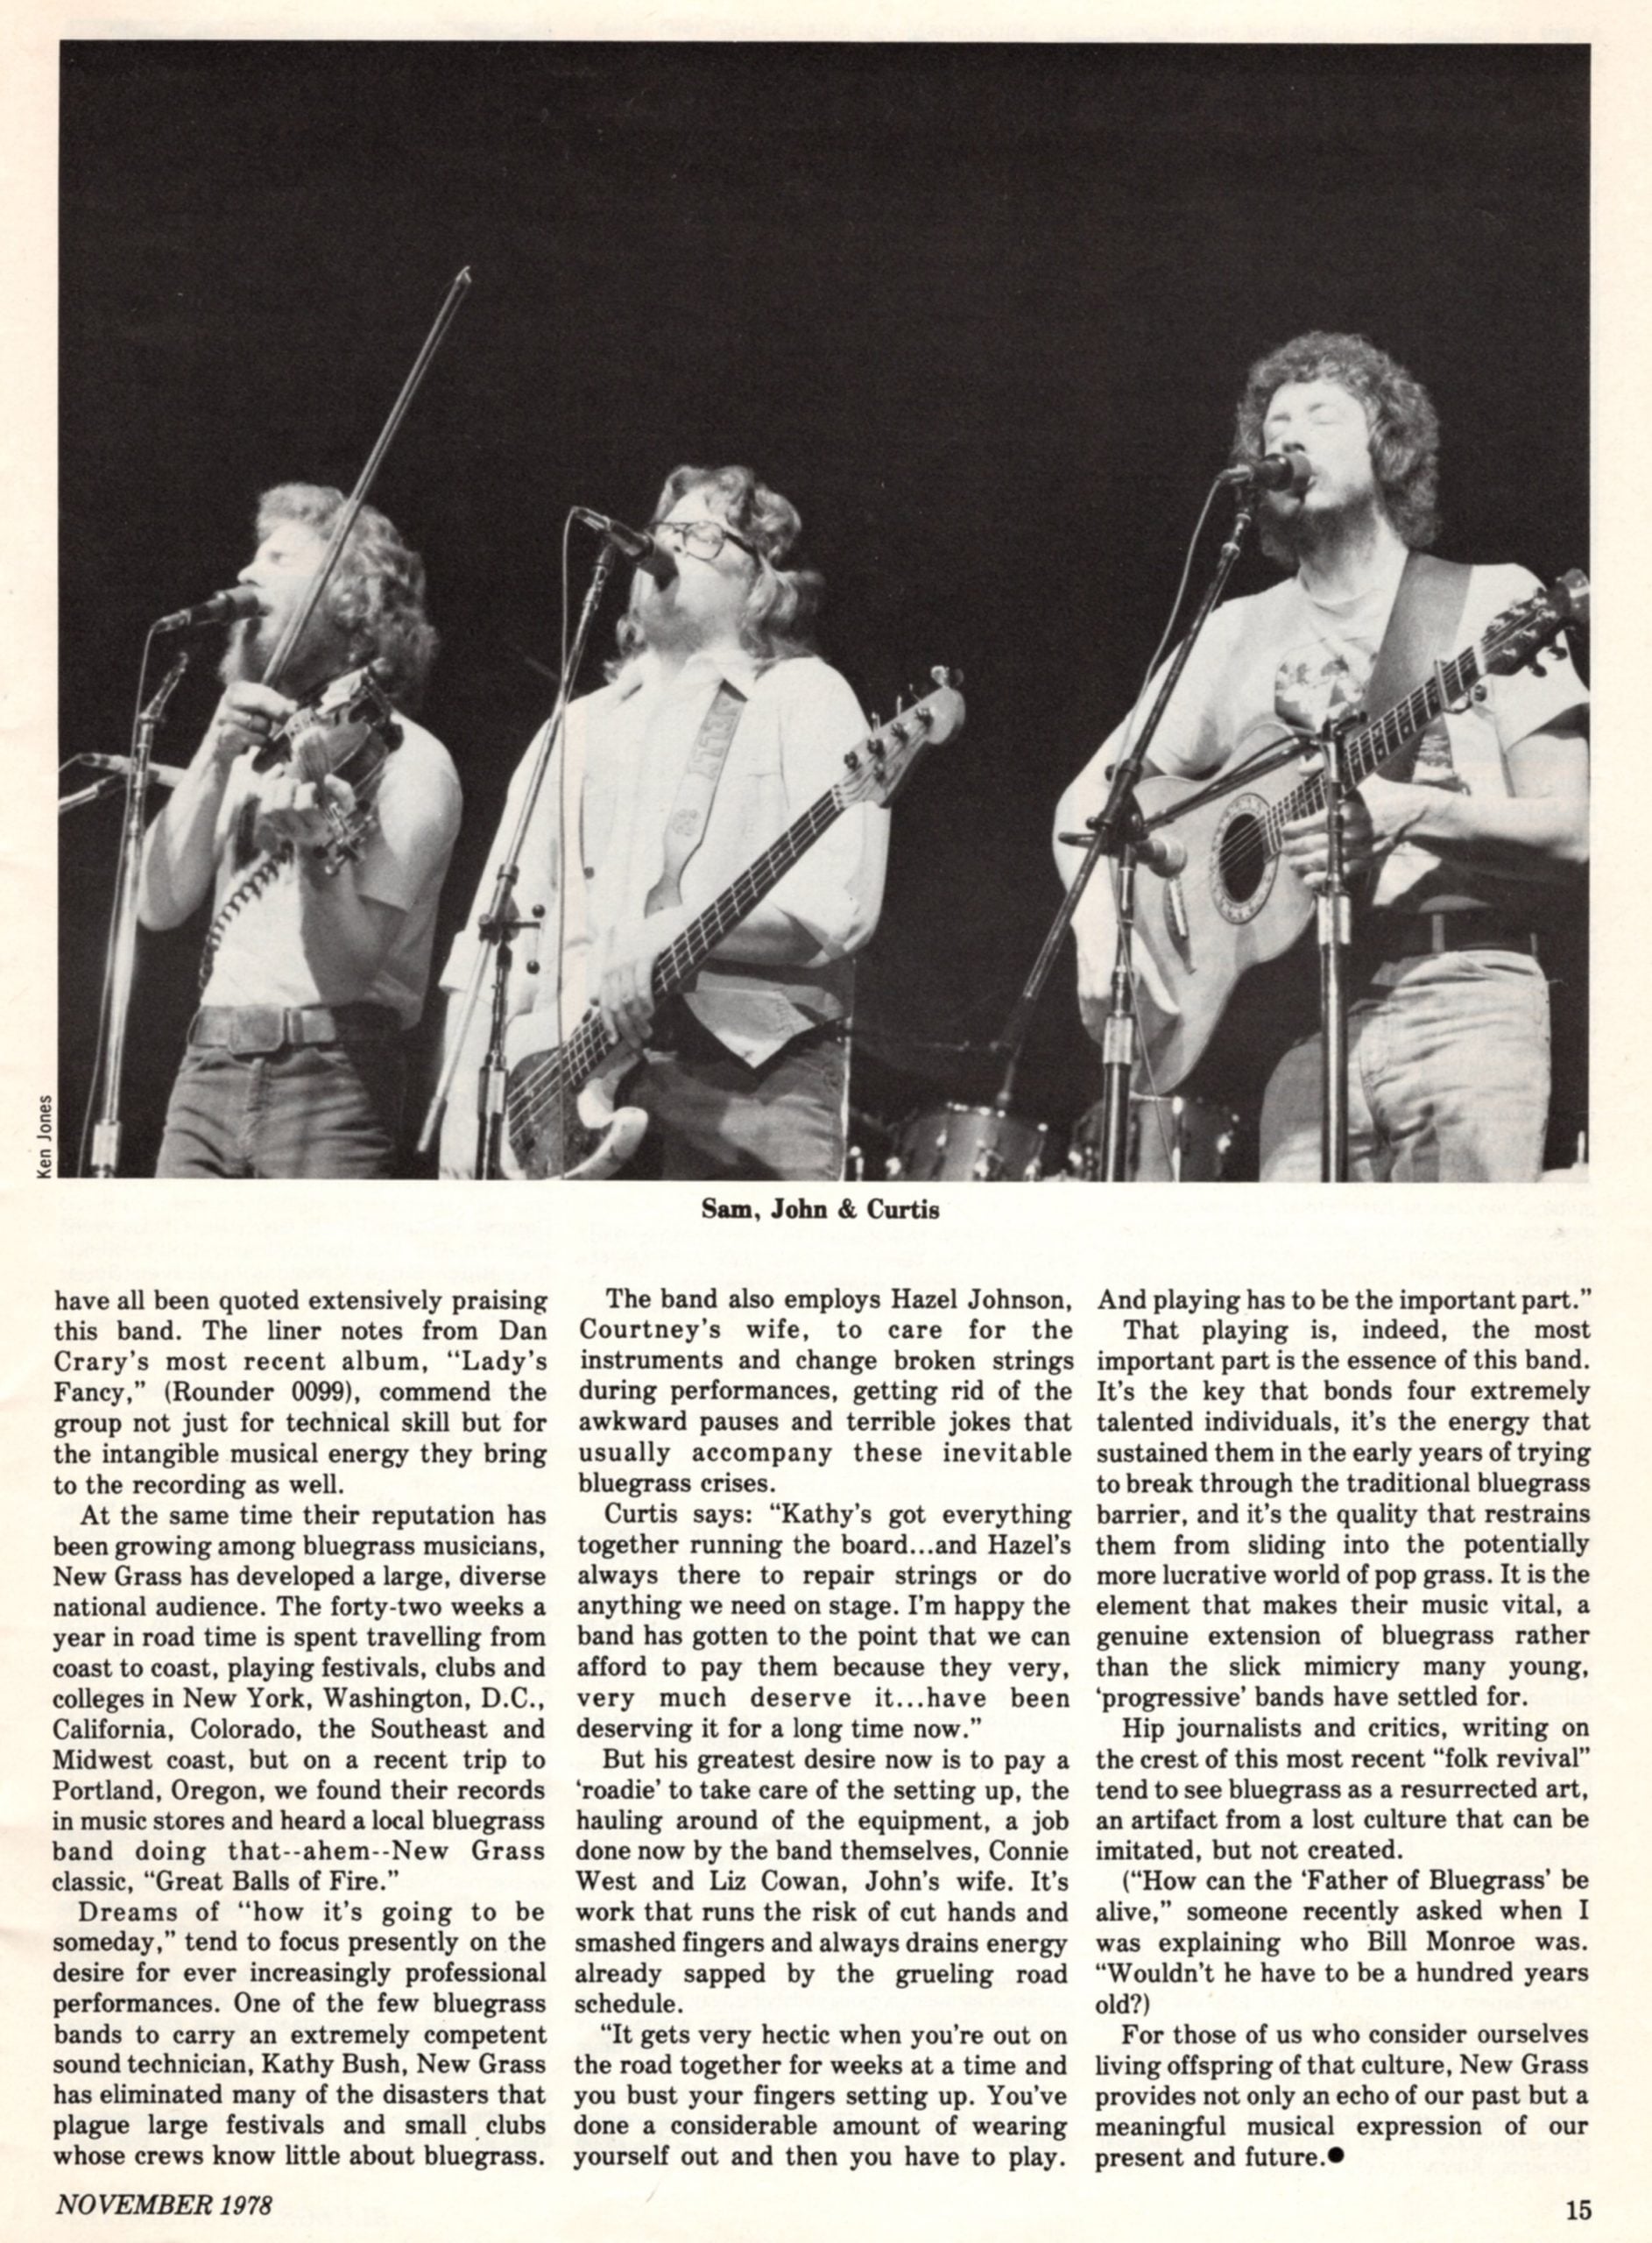 Clipping from original Bluegrass Unlimited magazine